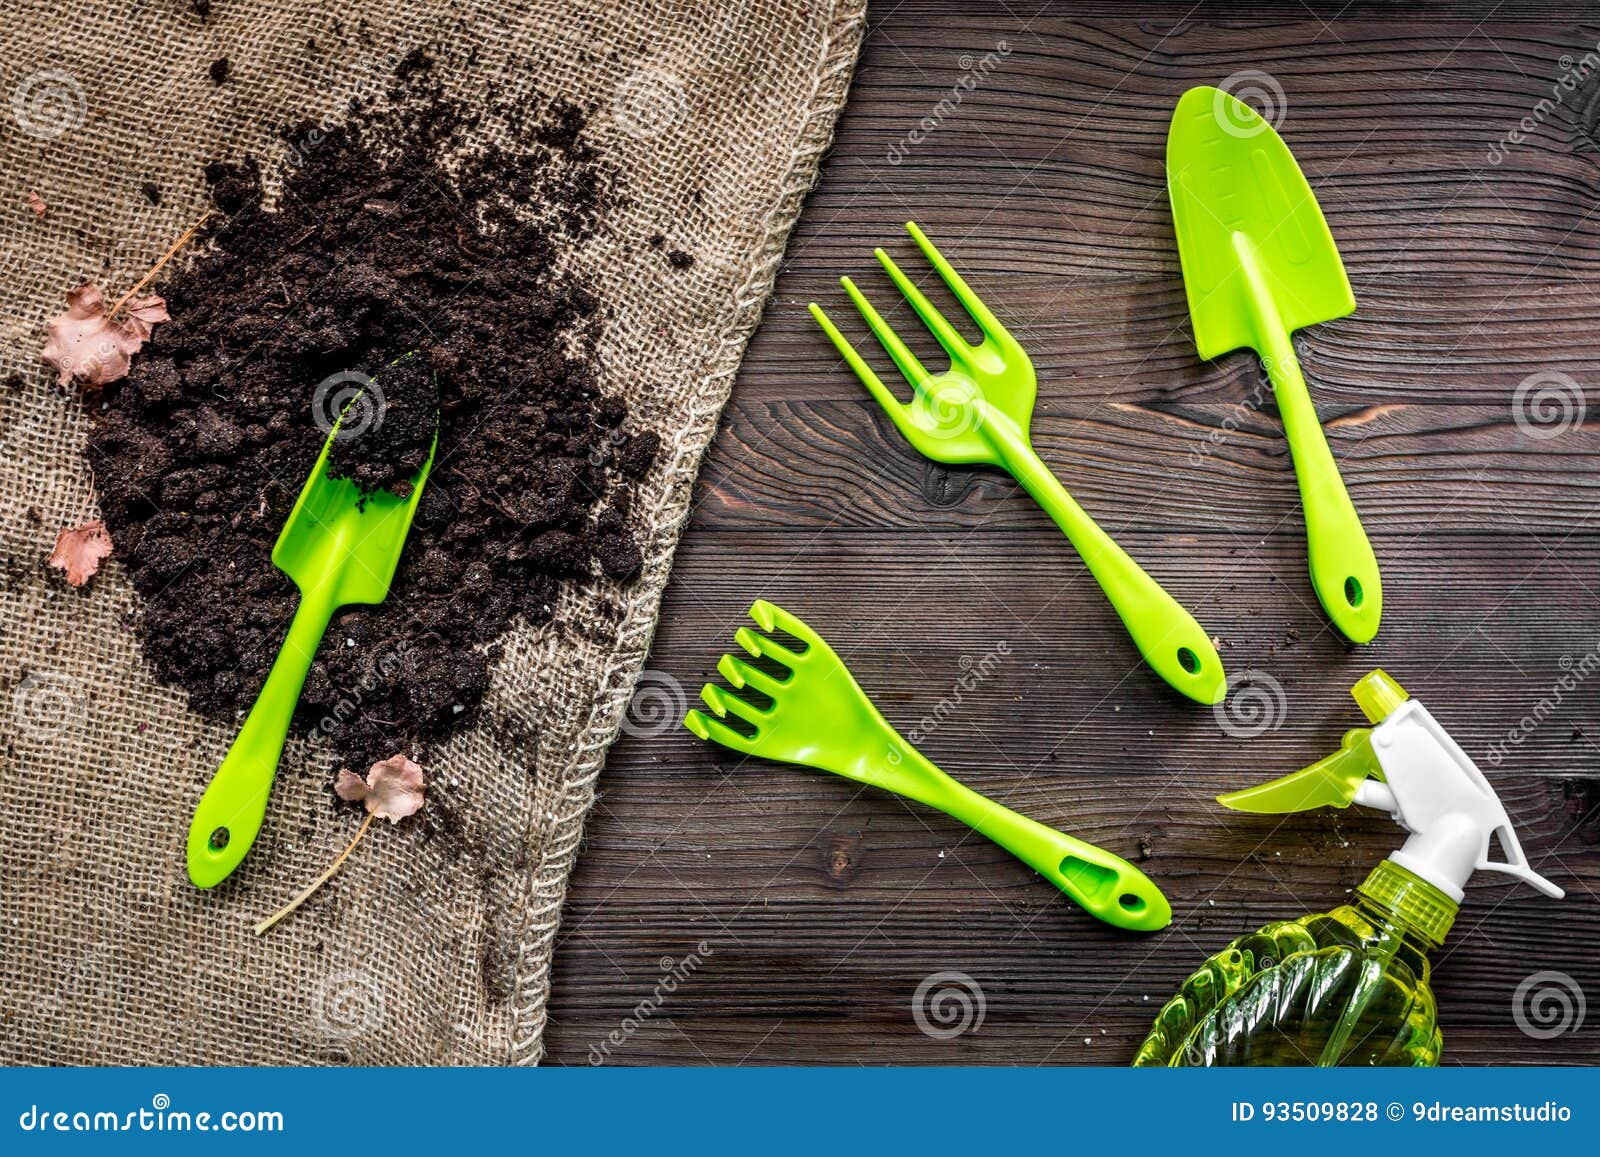 Green Garden Tools and Ground for Planting Flowers on Wooden Table ...